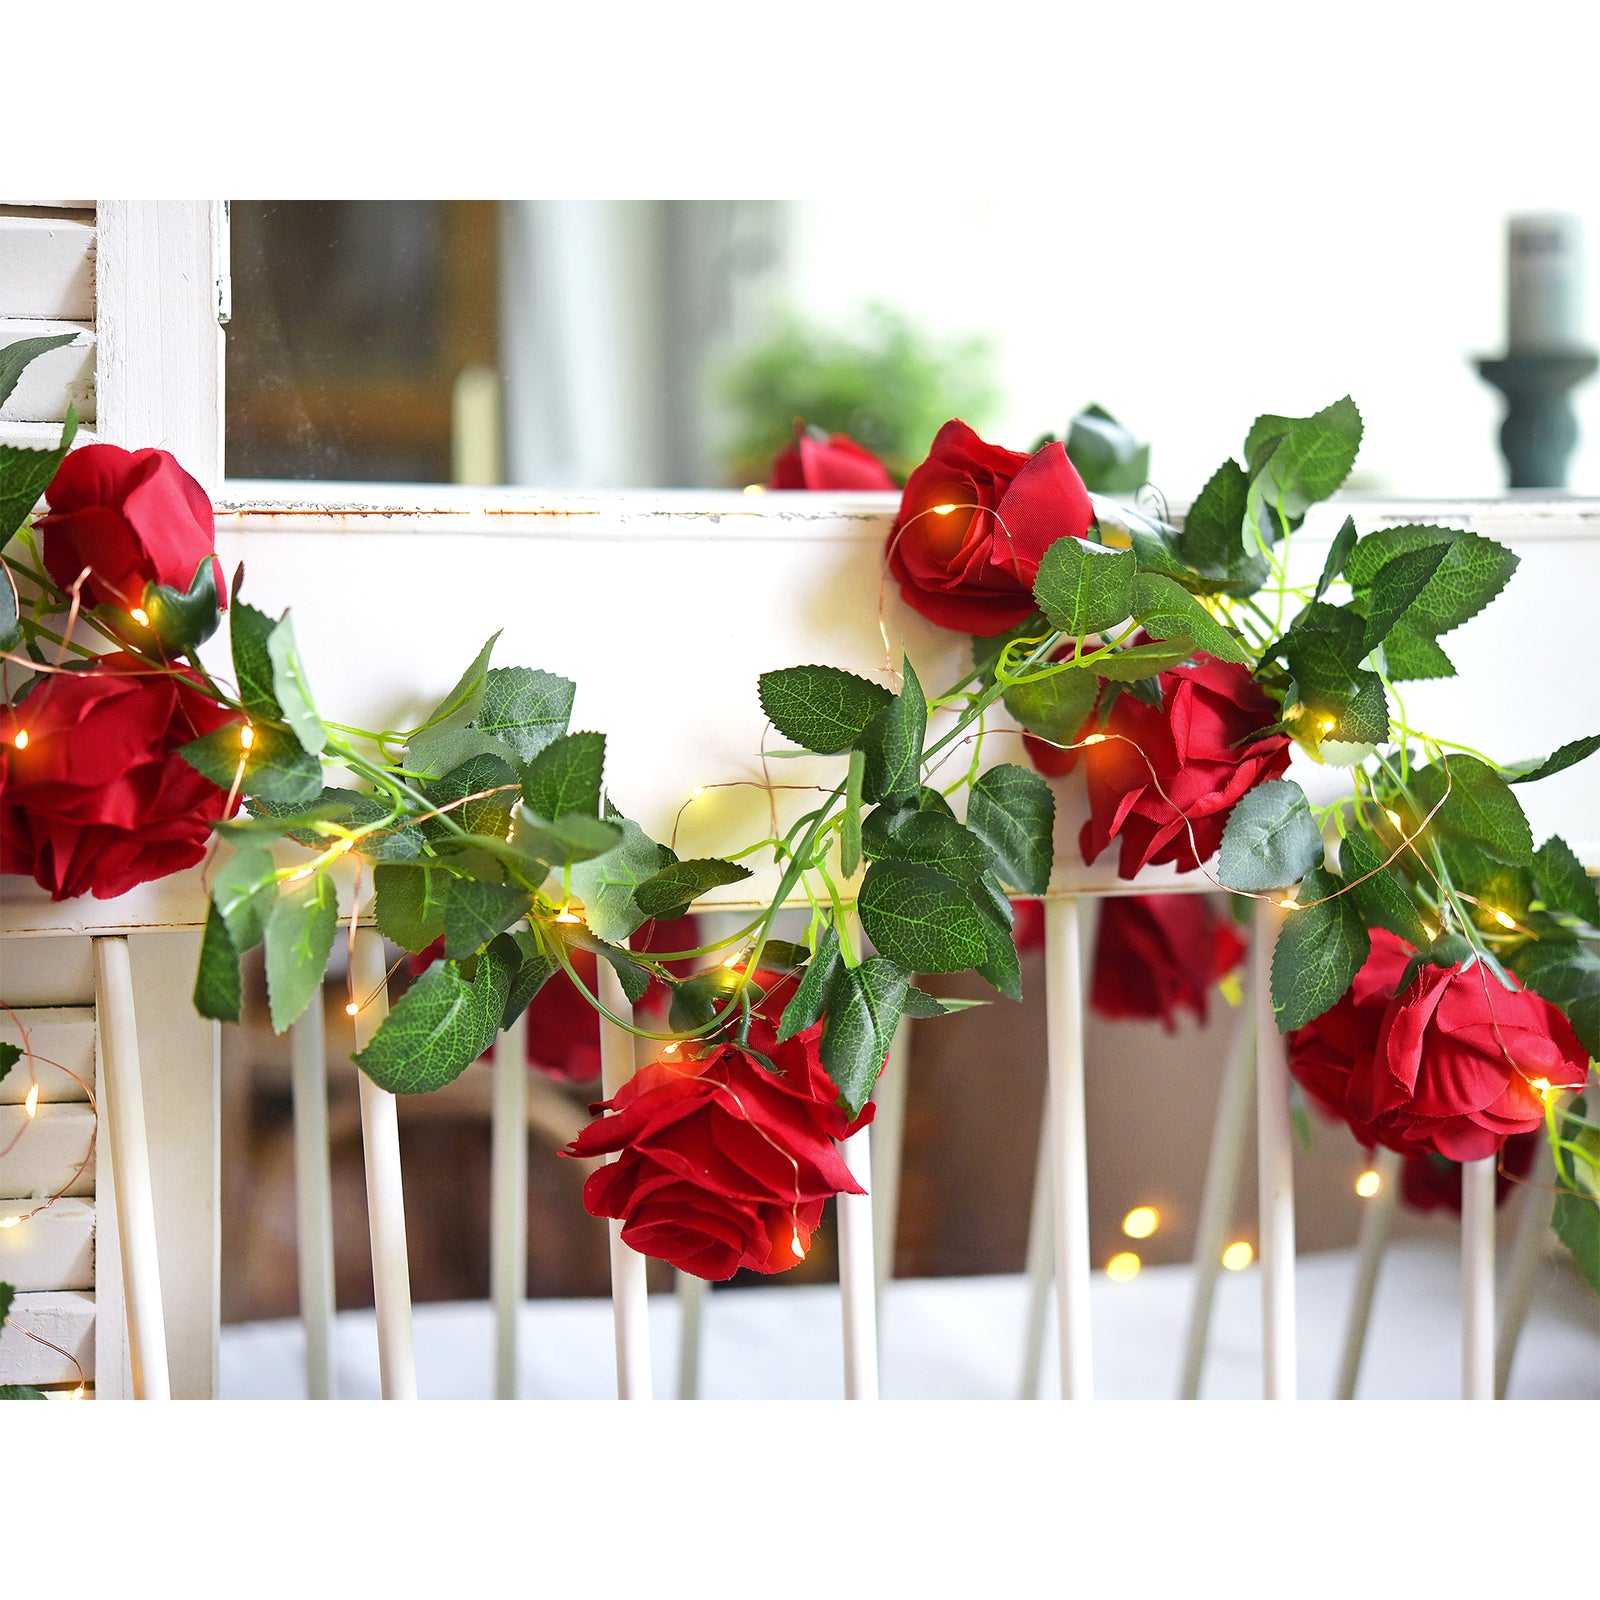 14 Ft 2 Pack Christmas Red Rose Silk Flower Garland Artificial Flowers Decoration Hanging Floral with 33 feet String Lights